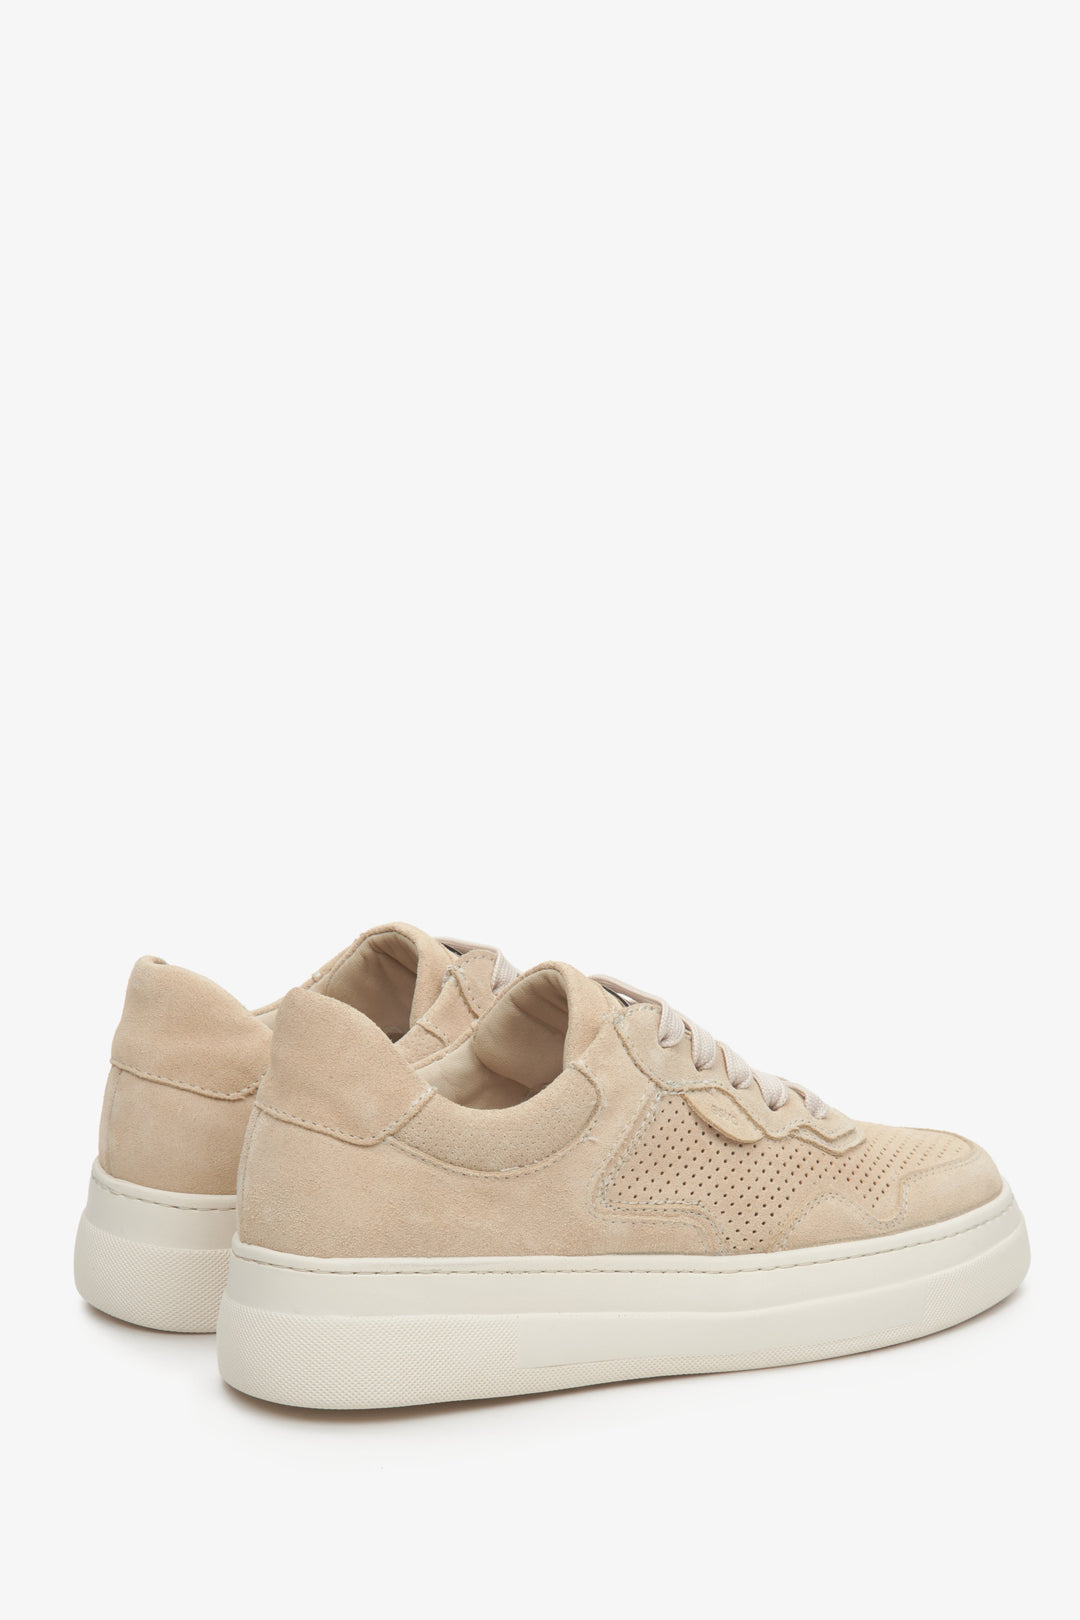 Women's suede sneakers in light beige Estro - close-up of the counter heel and side seam.